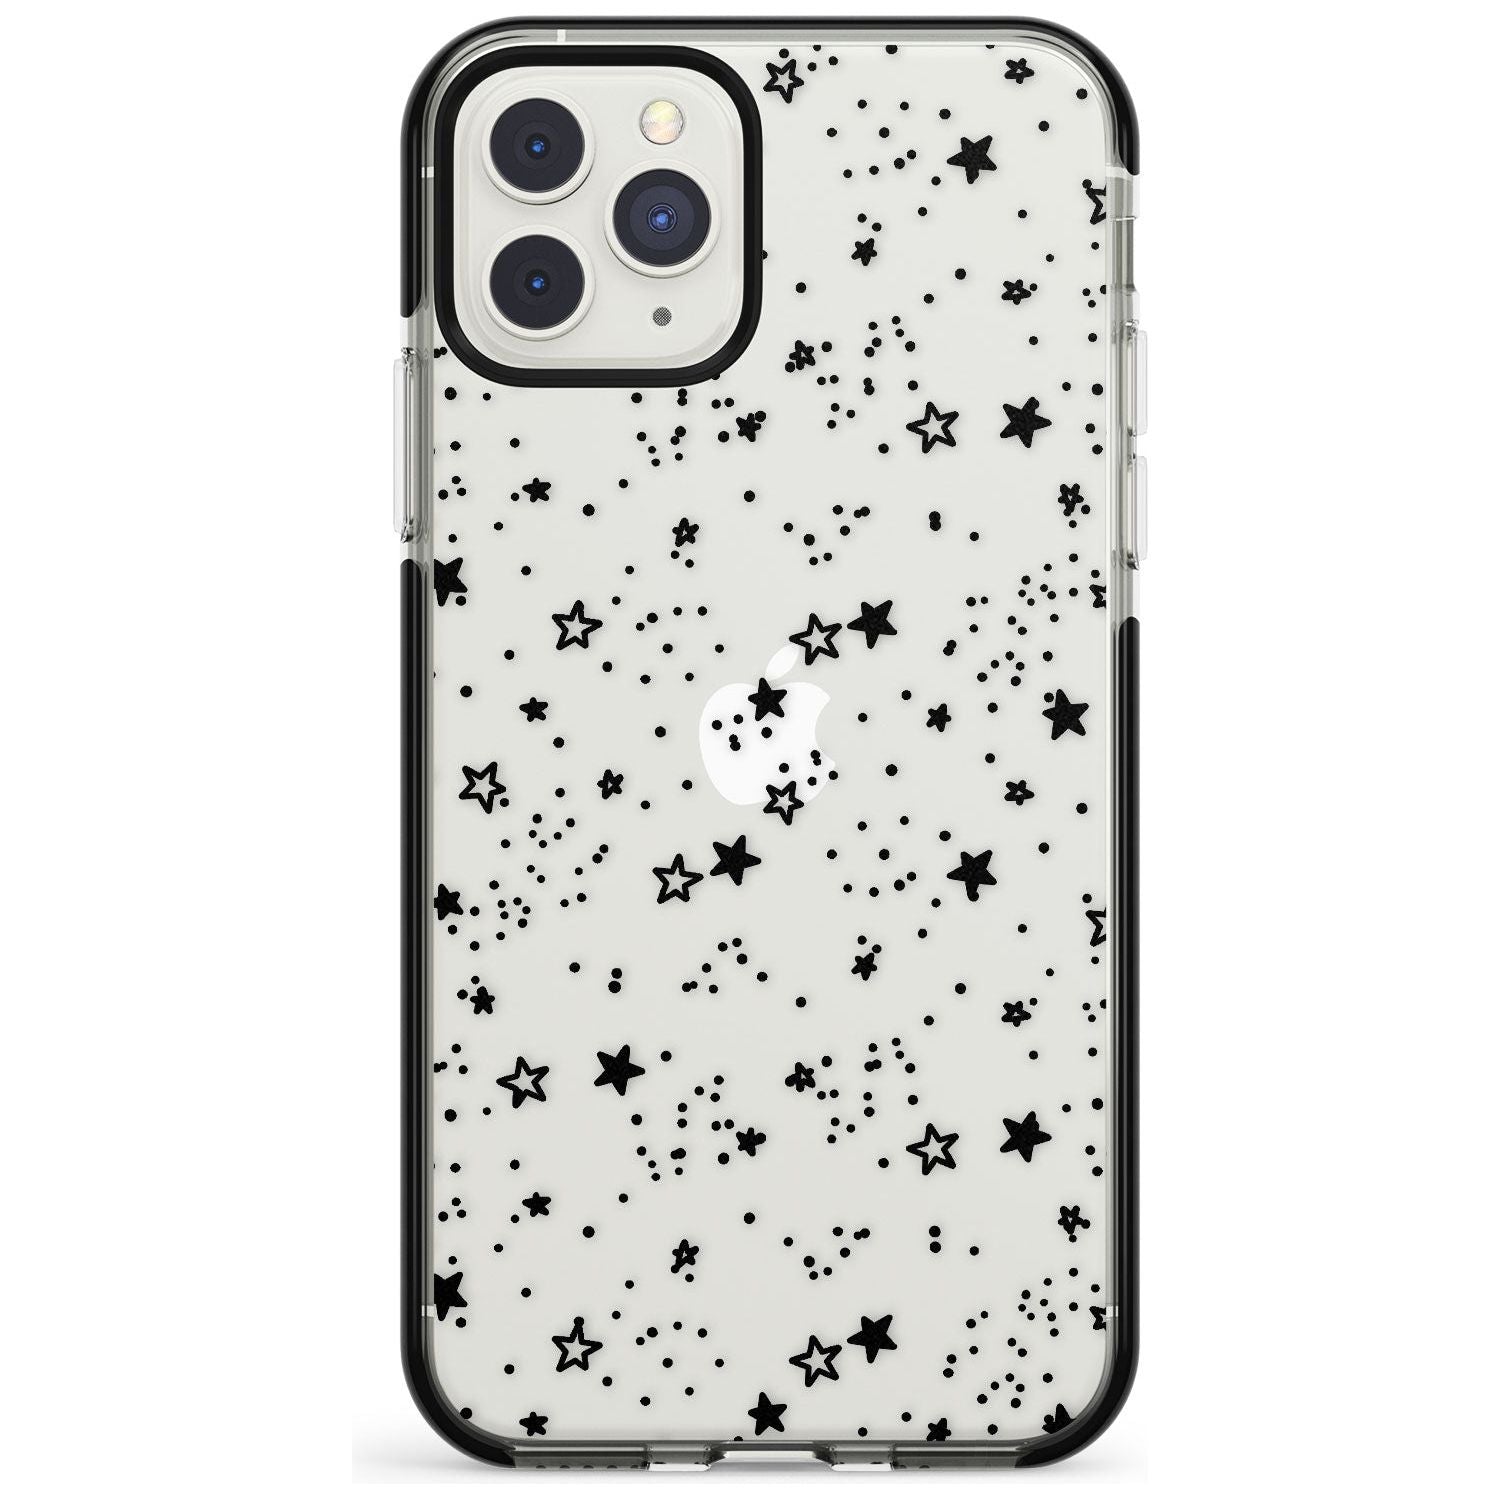 Mixed Stars Black Impact Phone Case for iPhone 11 Pro Max